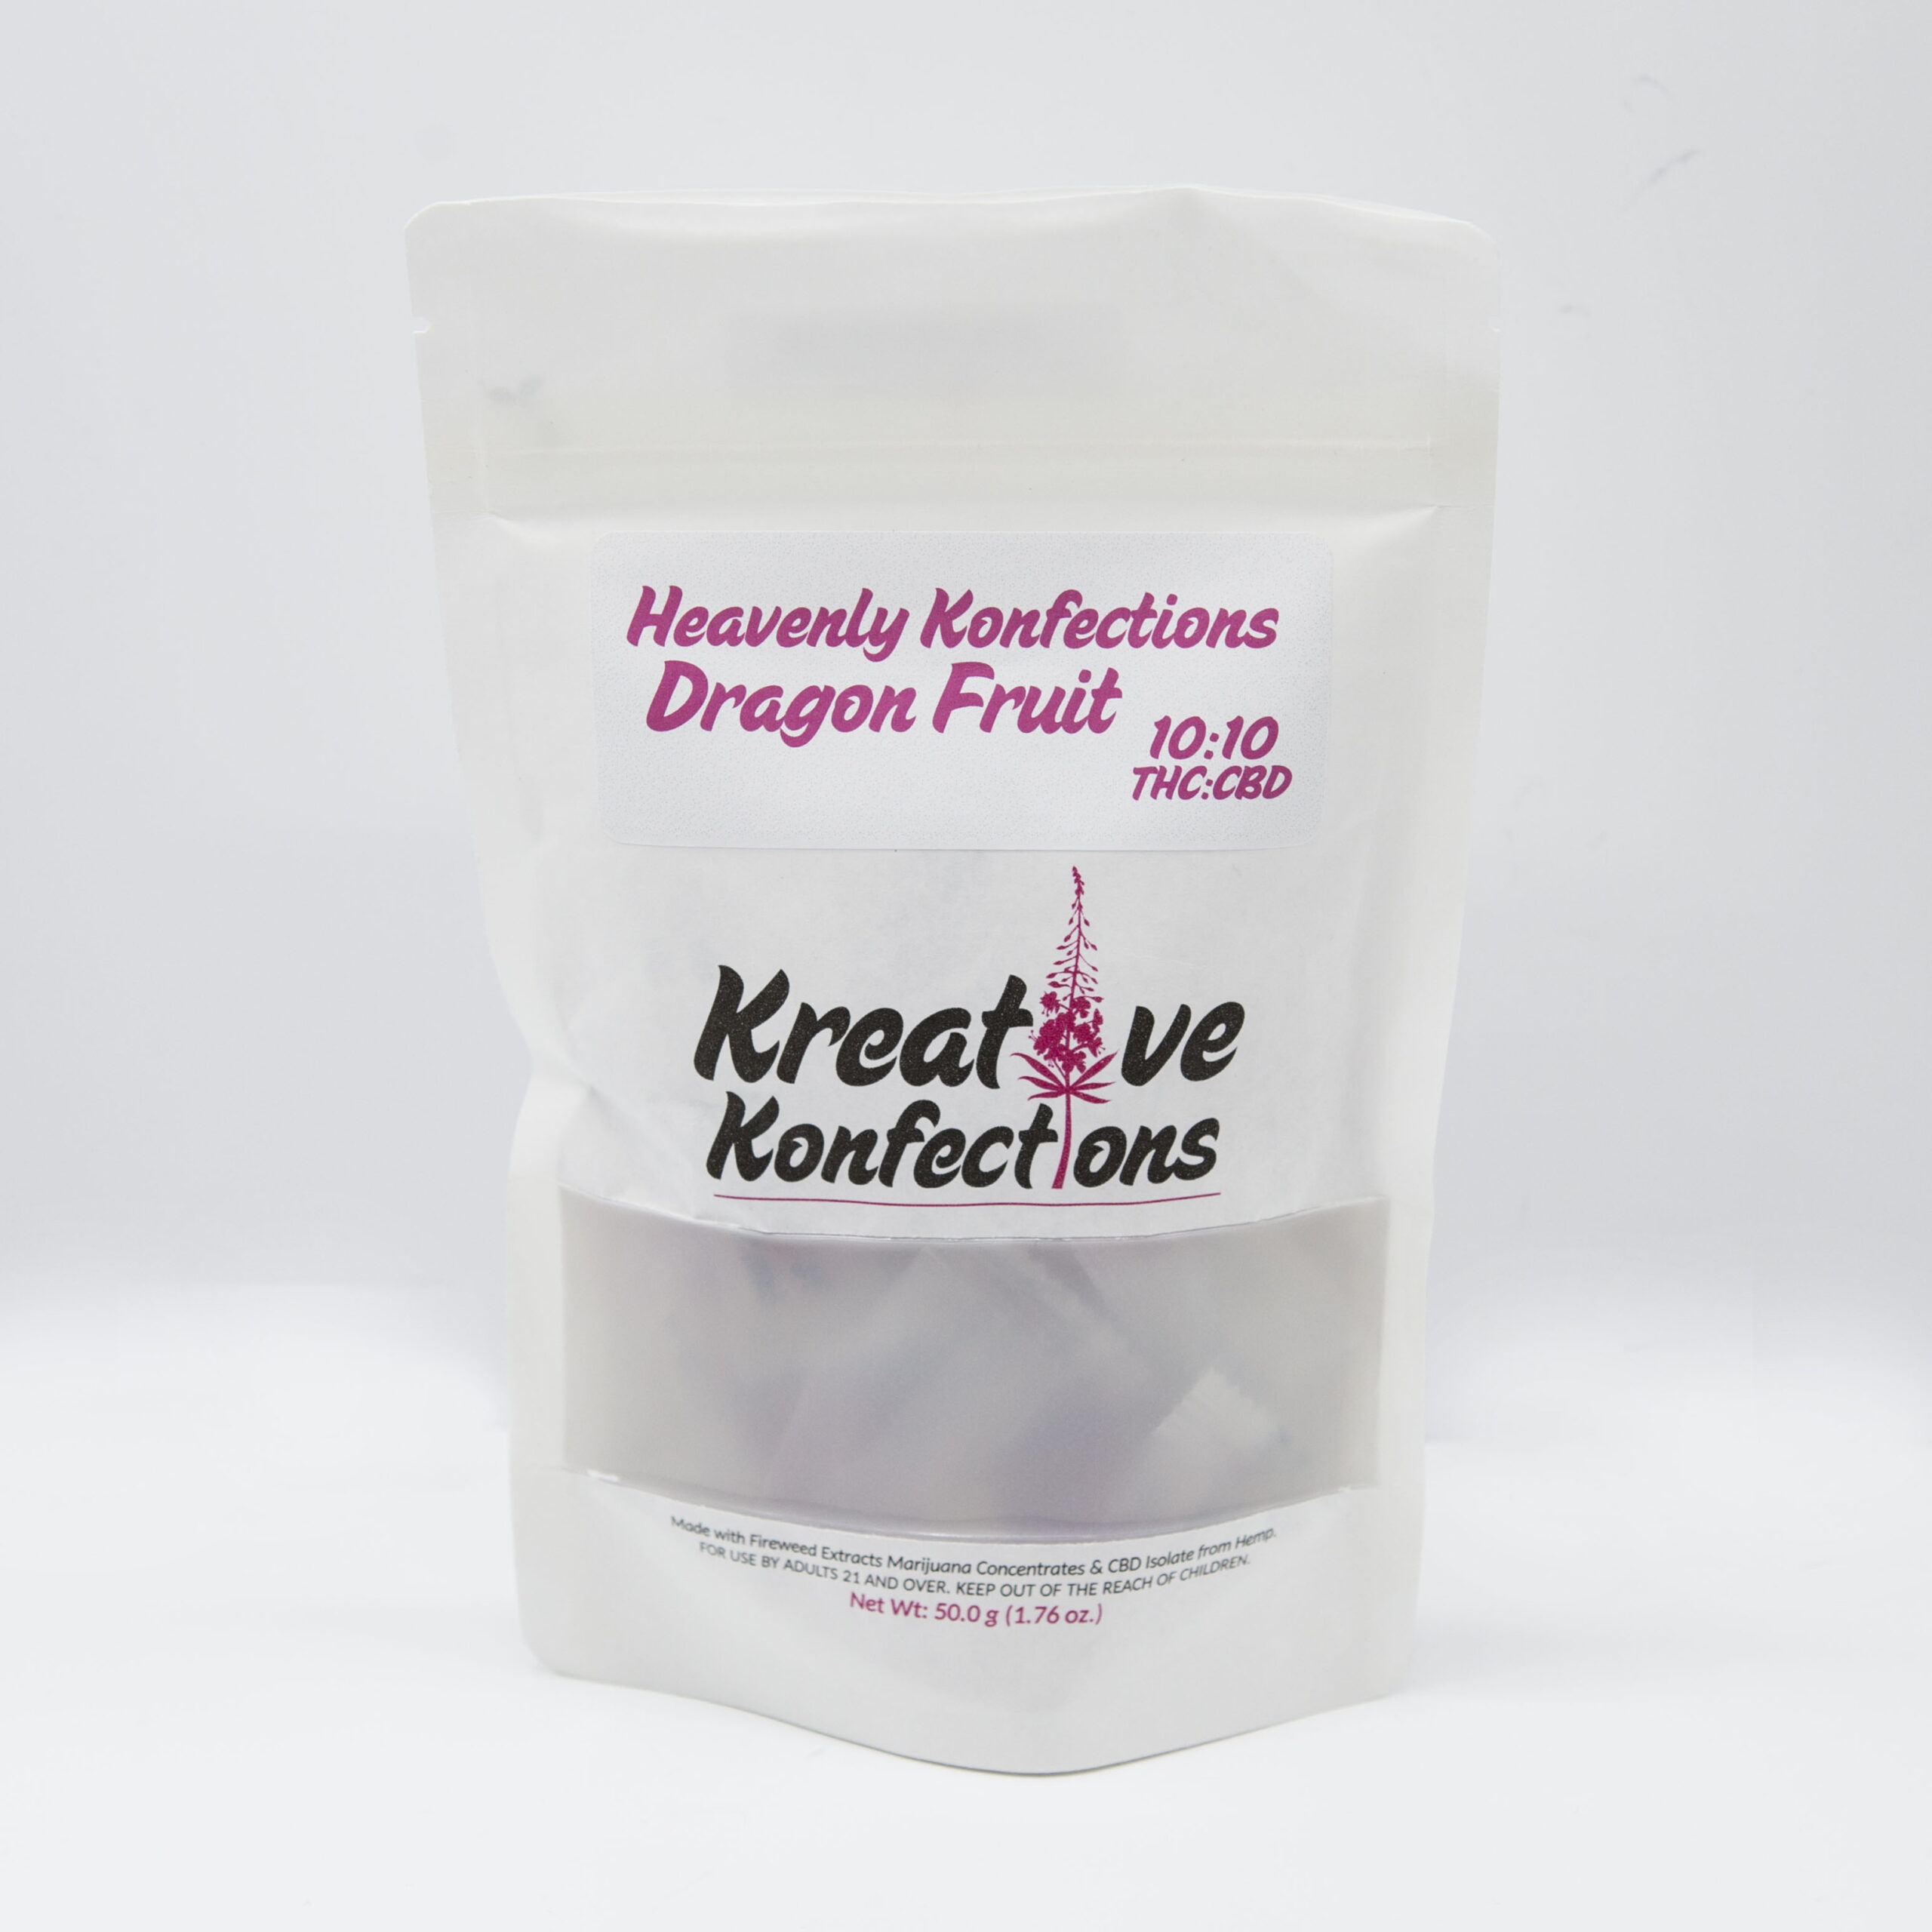 Dragon Fruit Heavenly Soft Chews by Kreative Konfections